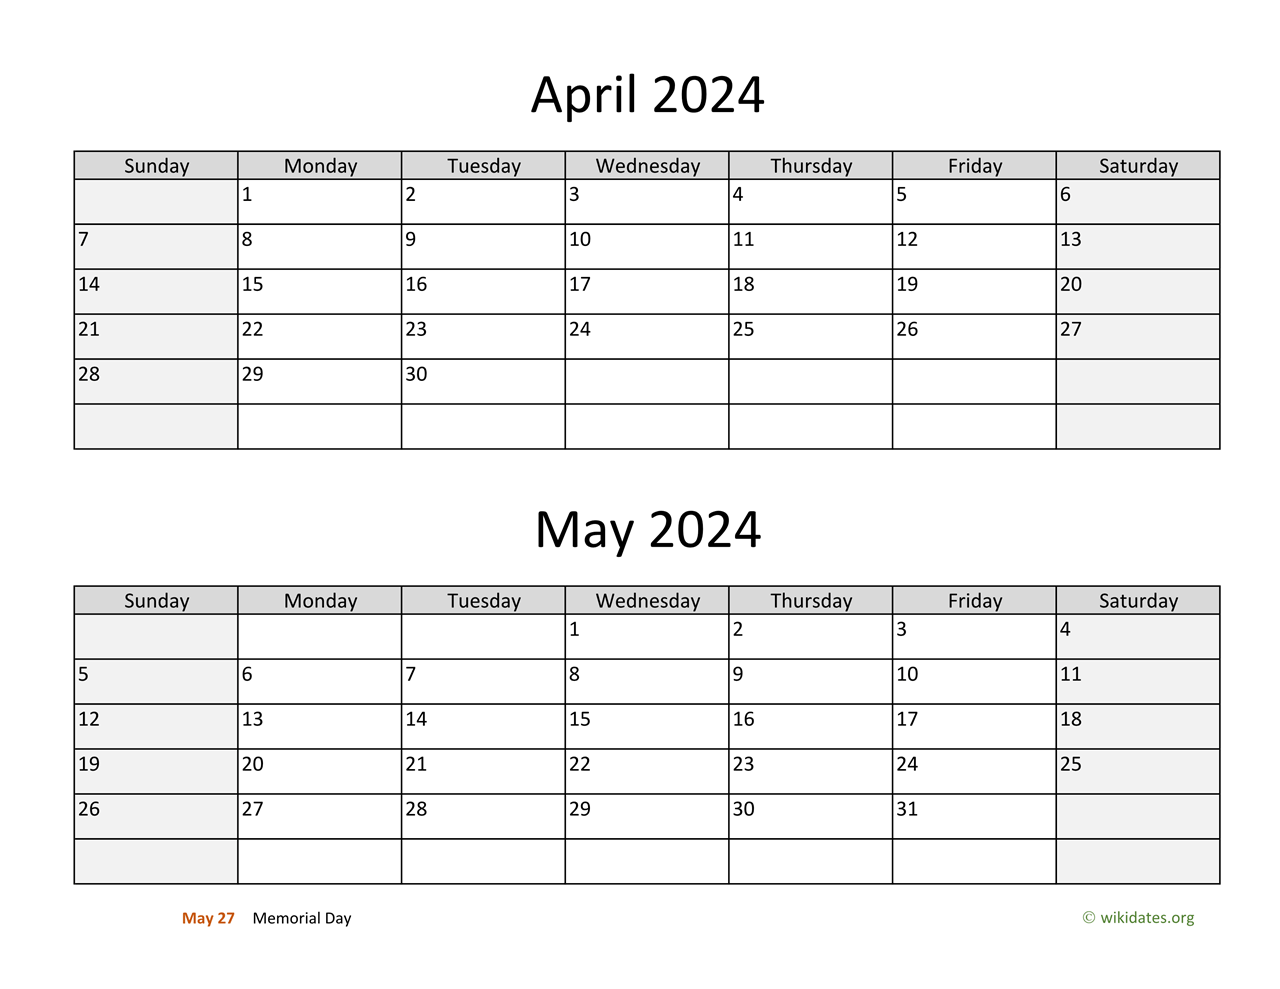 April And May 2024 Calendar | Wikidates for Printable Calendar 2024 April And May